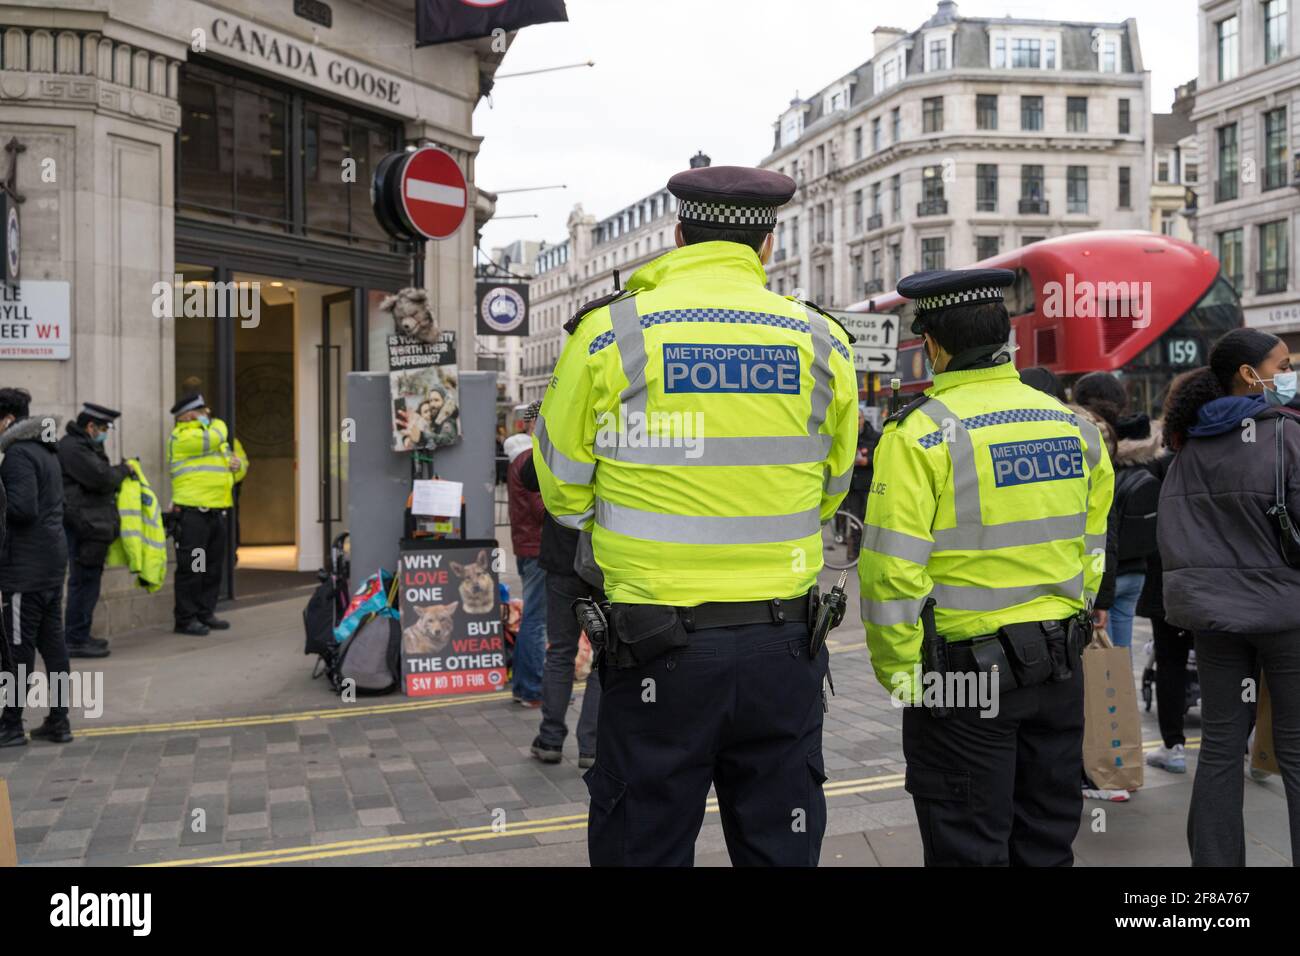 London 12th April 2021: Police respond to Campaigners from Peta protesting outside a 'Canada Goose' store against animal cruelty on Regent street, UK Stock Photo